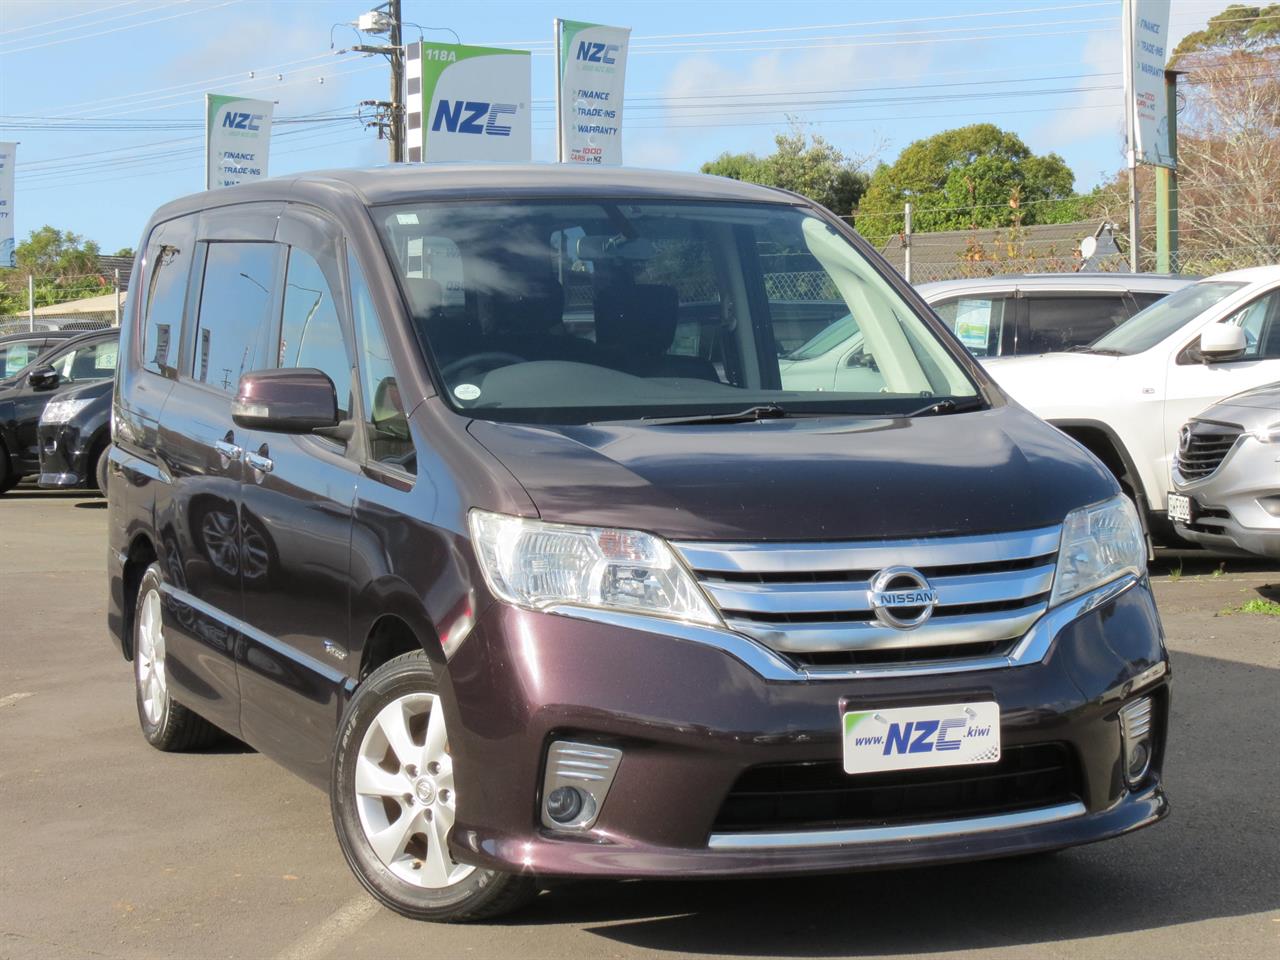 NZC 2013 Nissan Serena just arrived to Auckland